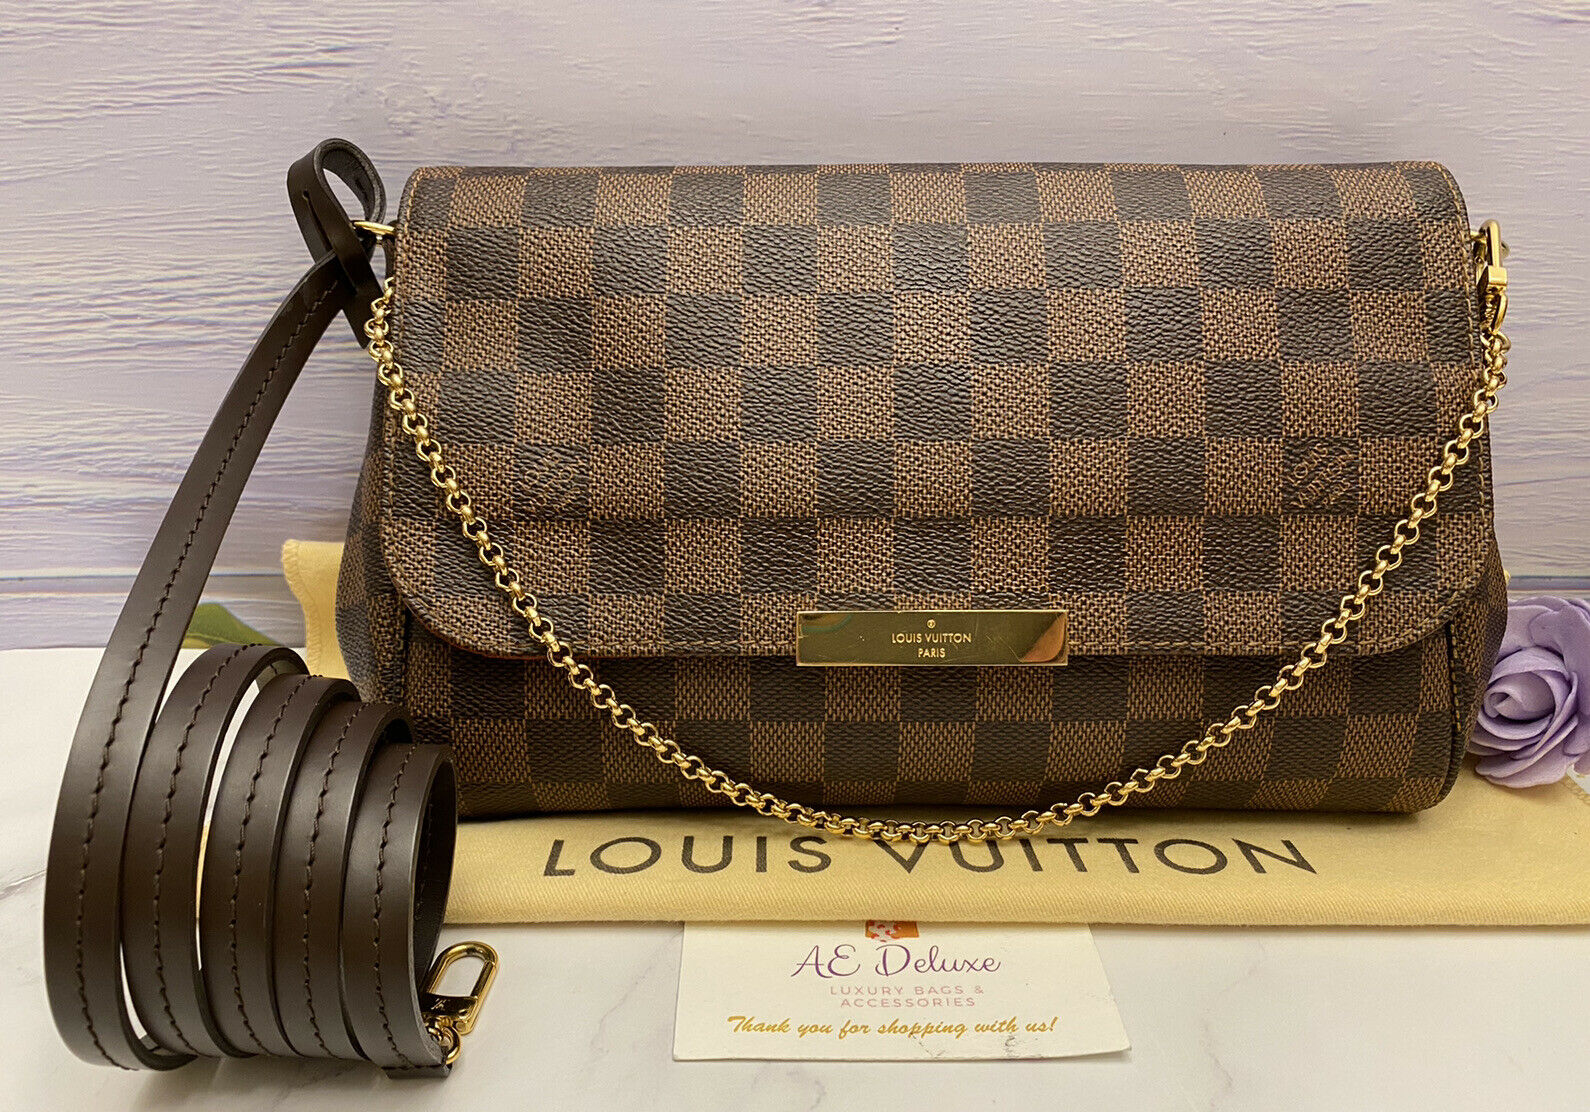 Louis Vuitton Favorite MM Damier Ebene with Clemence wallet and Cles.  Louis  vuitton handbags black, Louis vuitton handbags prices, Louis vuitton  favorite mm